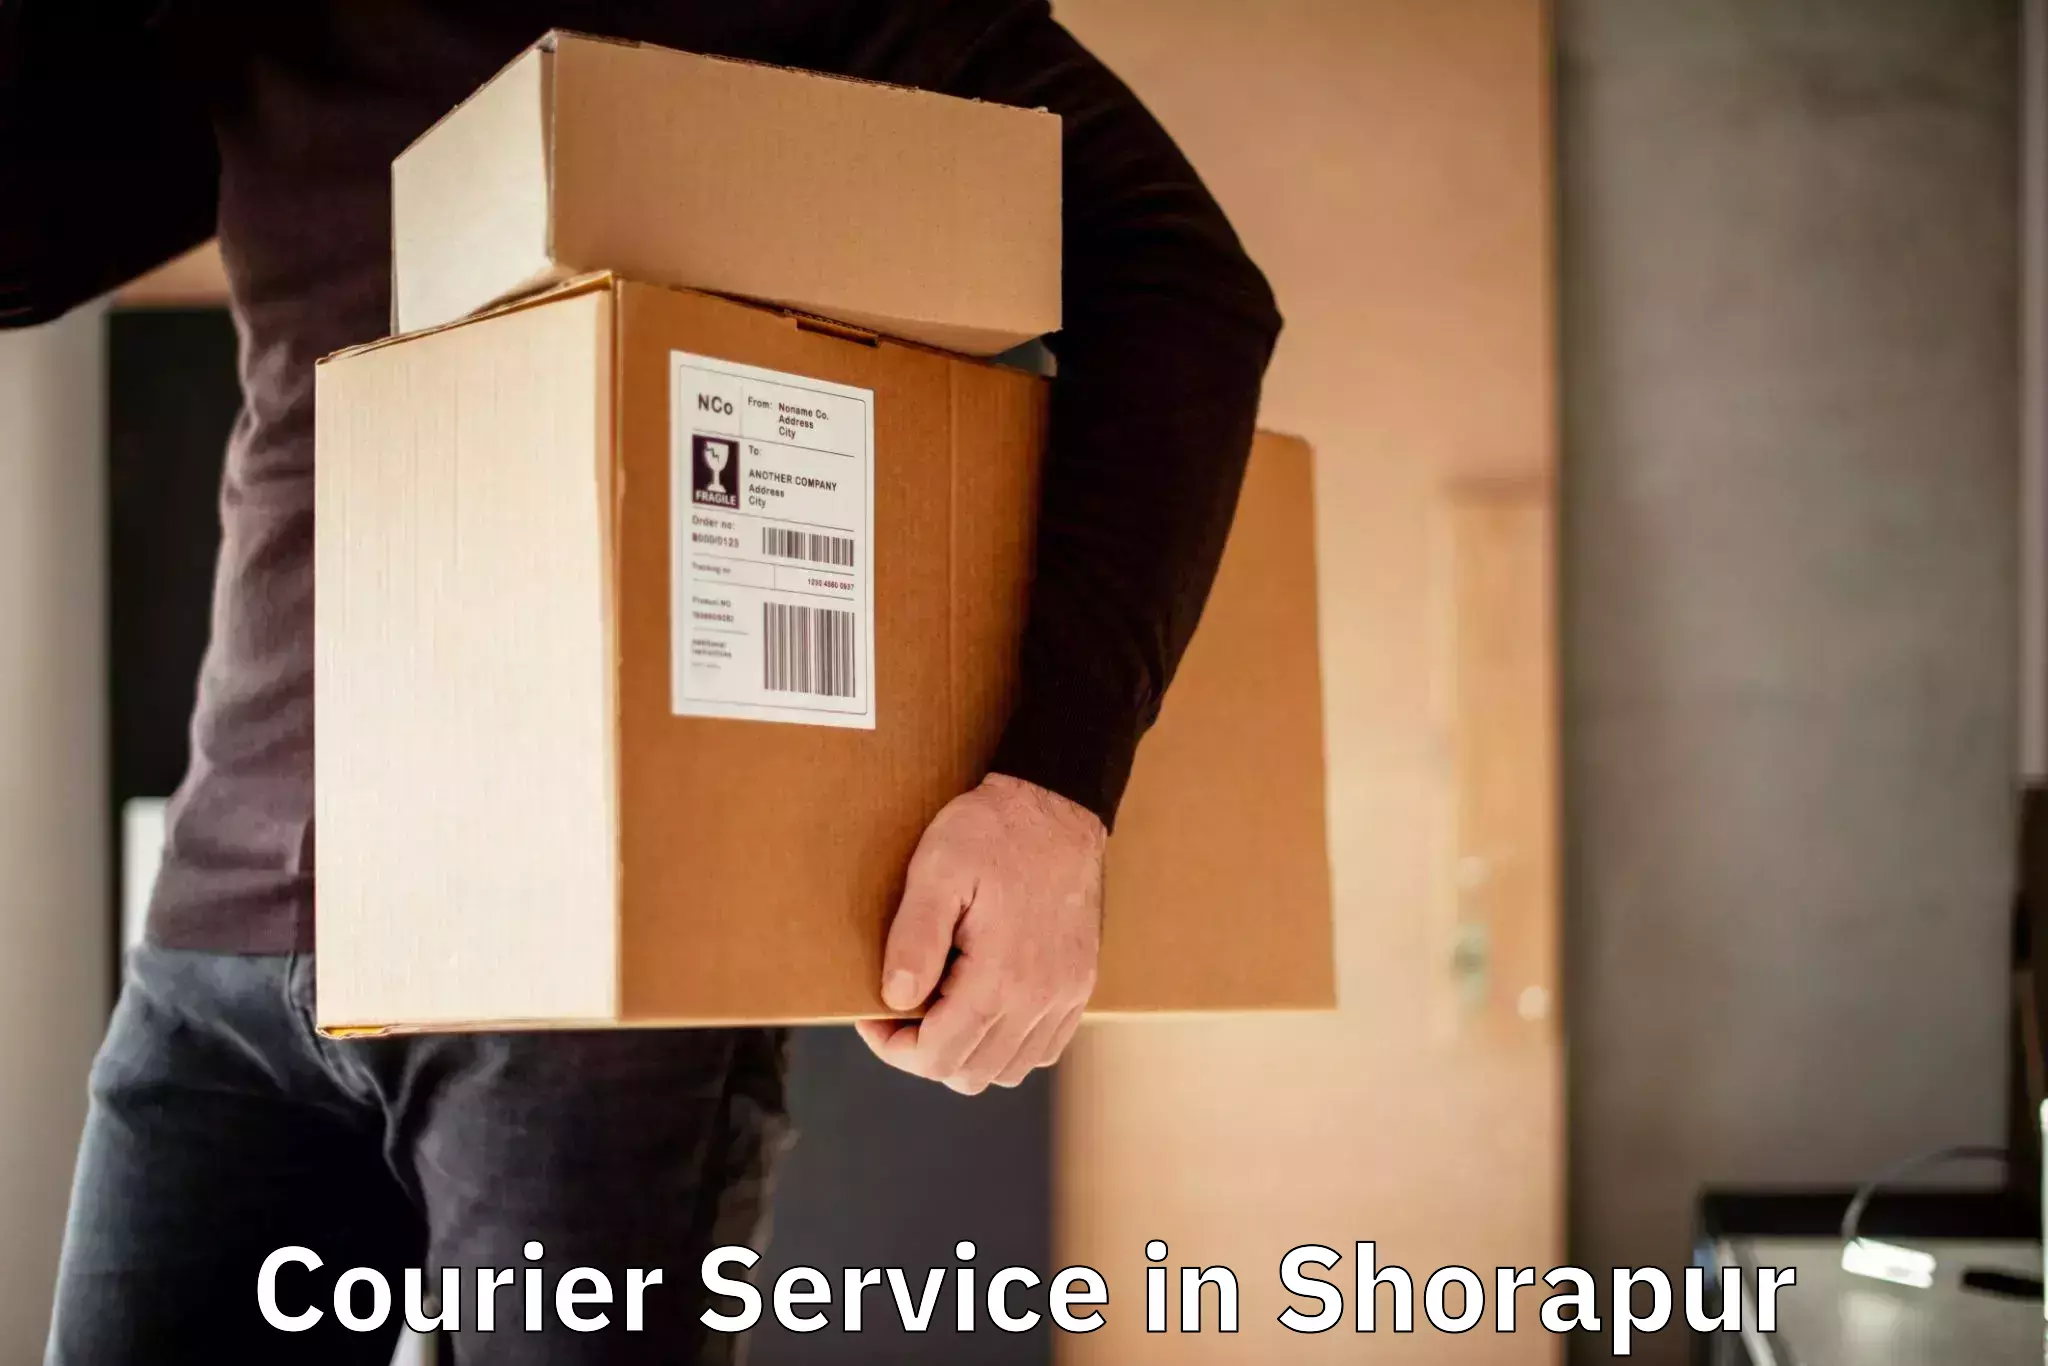 Budget-friendly shipping in Shorapur